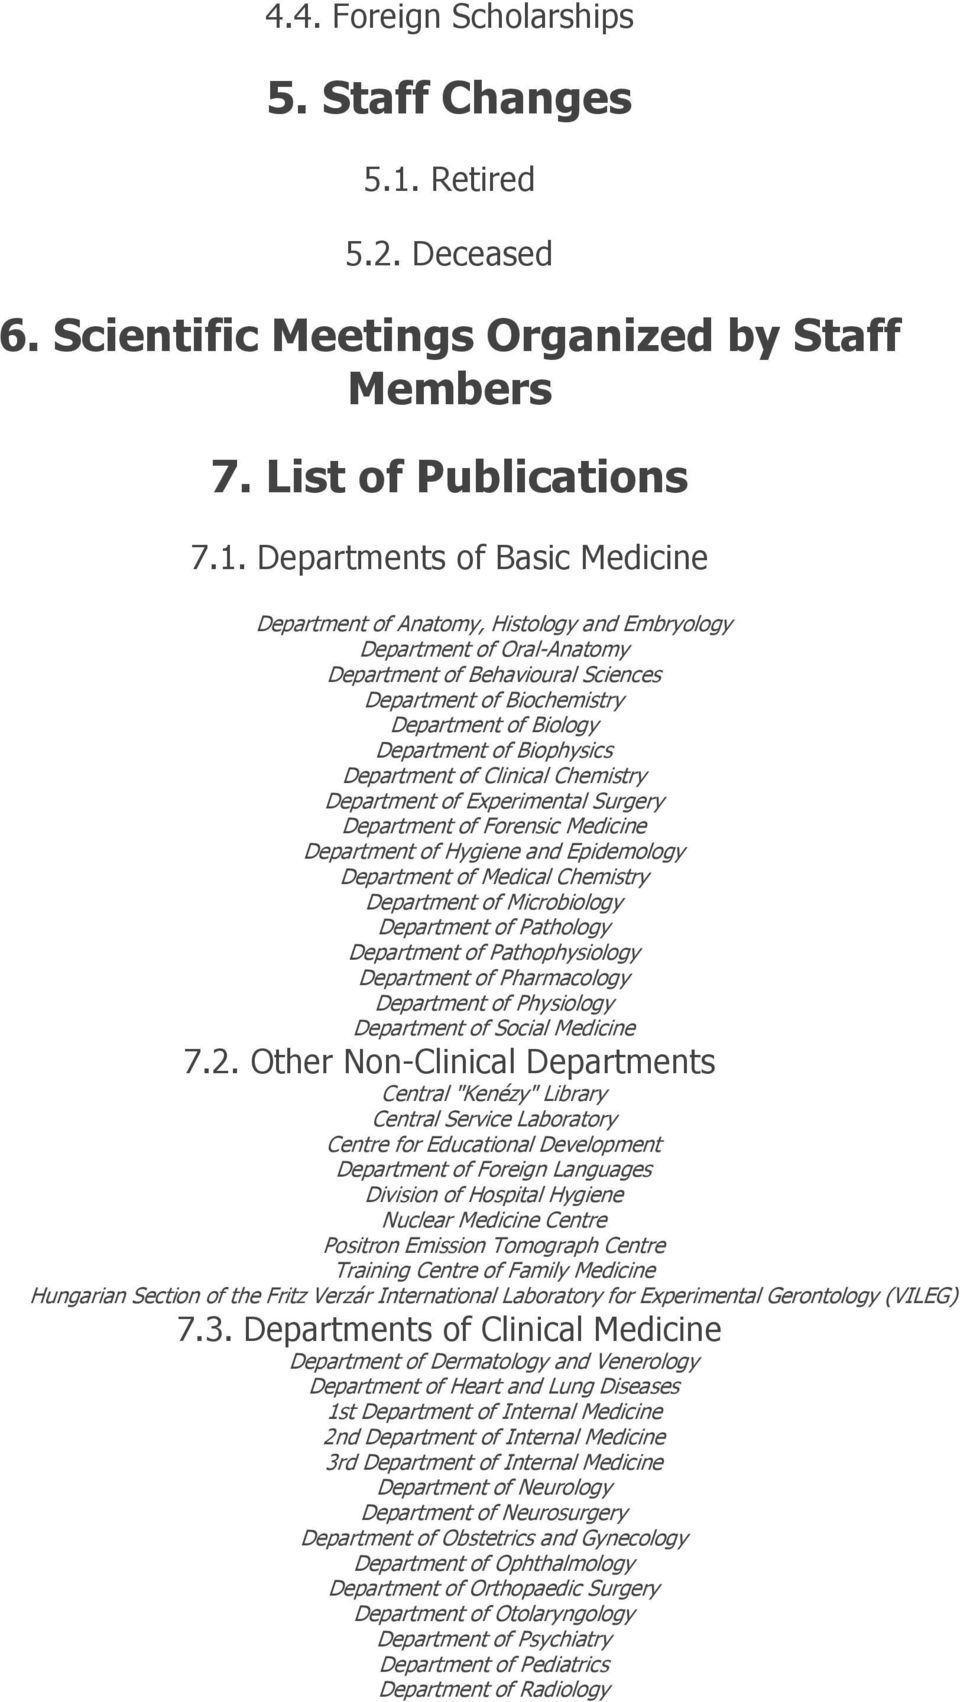 Departments of Basic Medicine Department of Anatomy, Histology and Embryology Department of Oral-Anatomy Department of Behavioural Sciences Department of Biochemistry Department of Biology Department